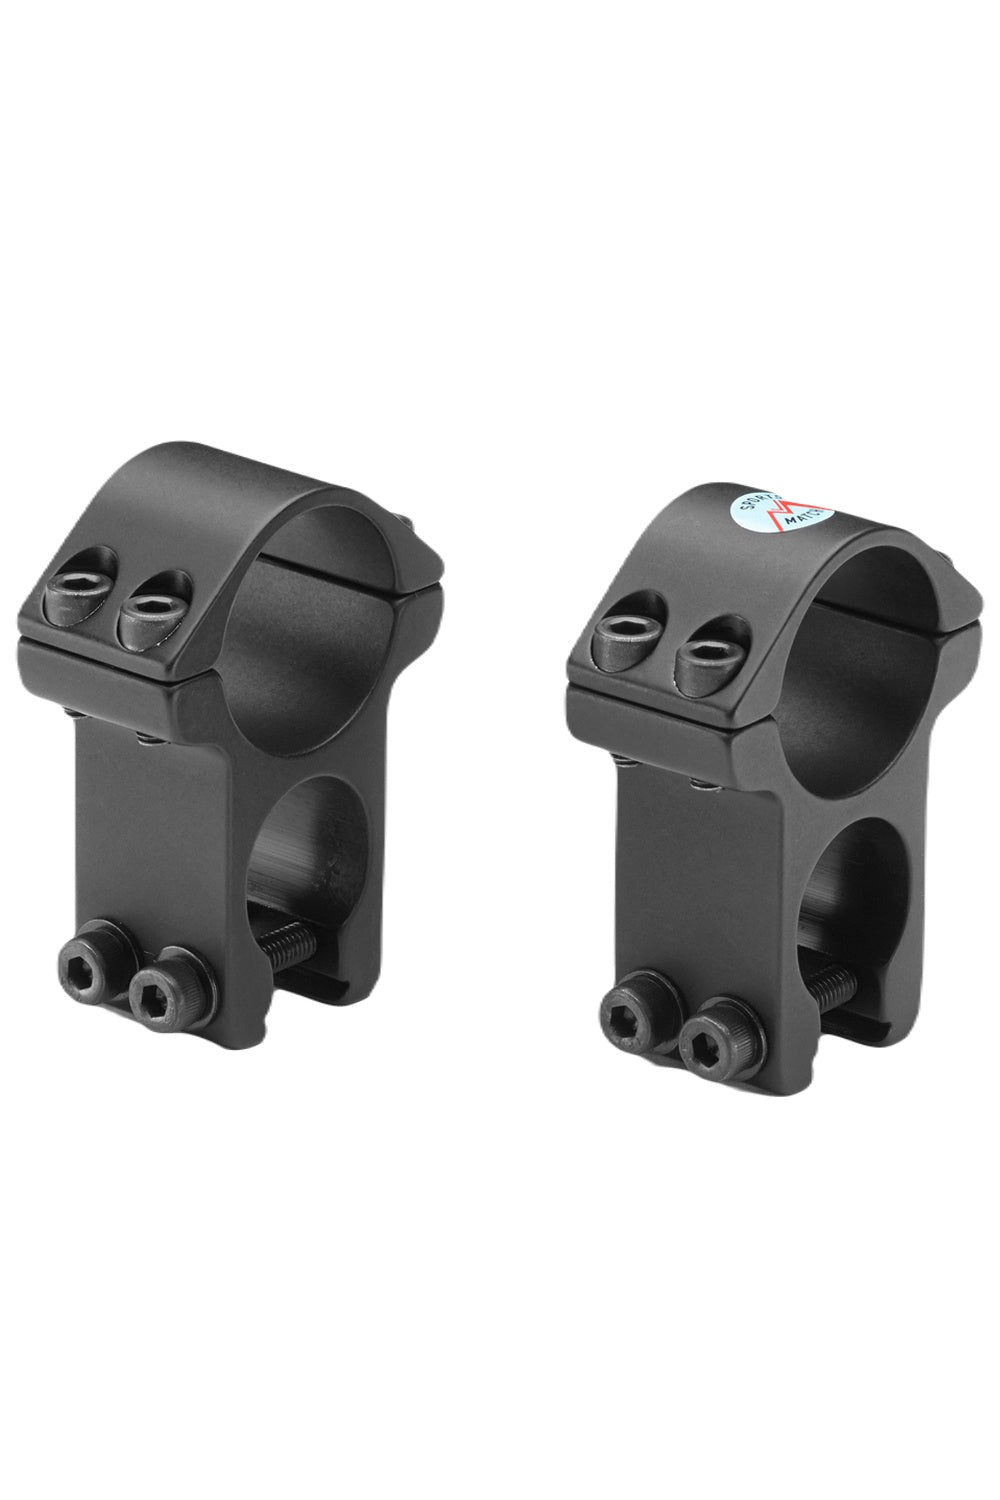 Bisley Two Piece See-Through Mounts